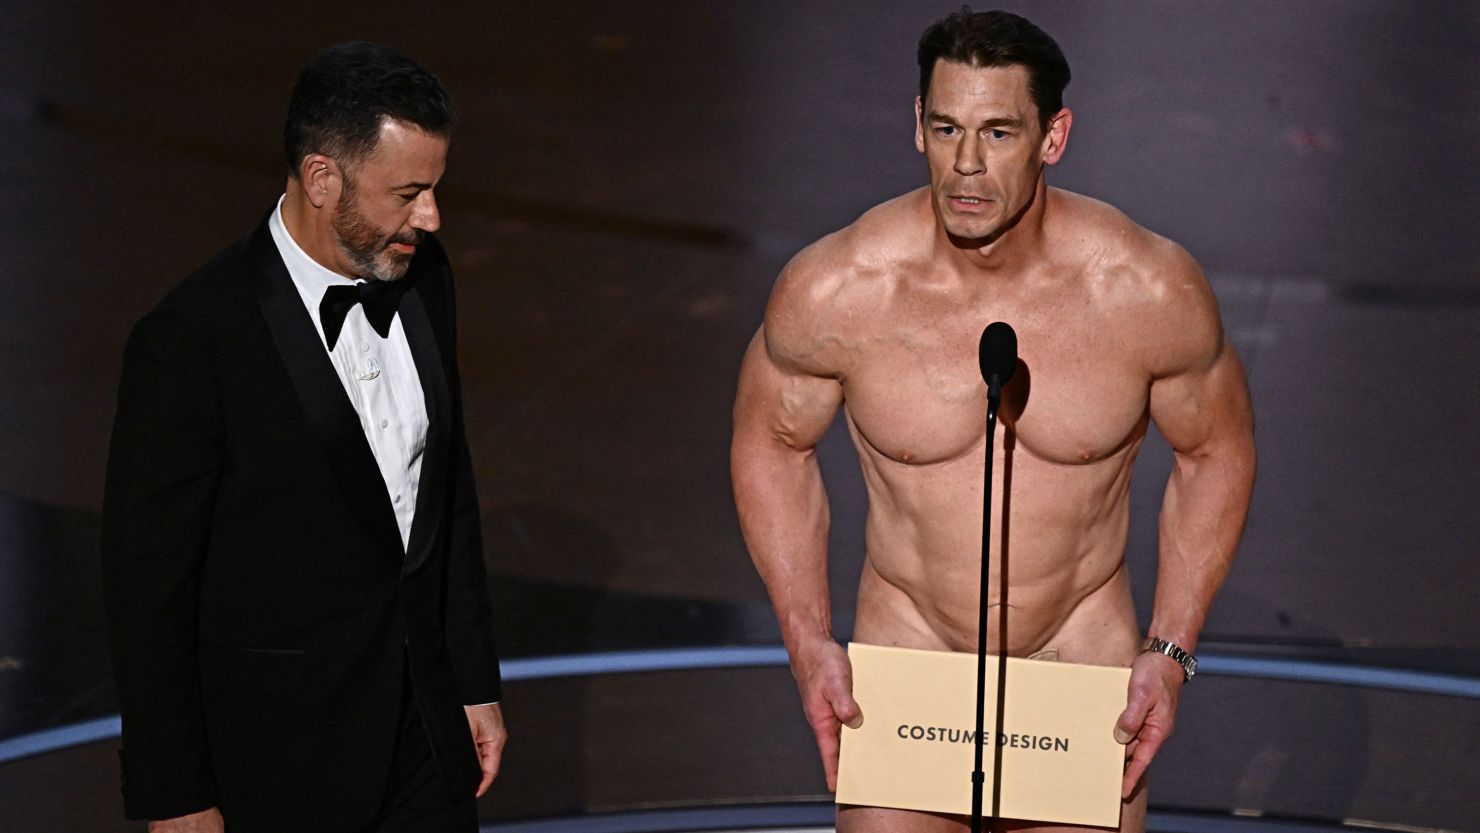 John Cena gives out costume design Oscar in his ‘birthday suit’ CNN